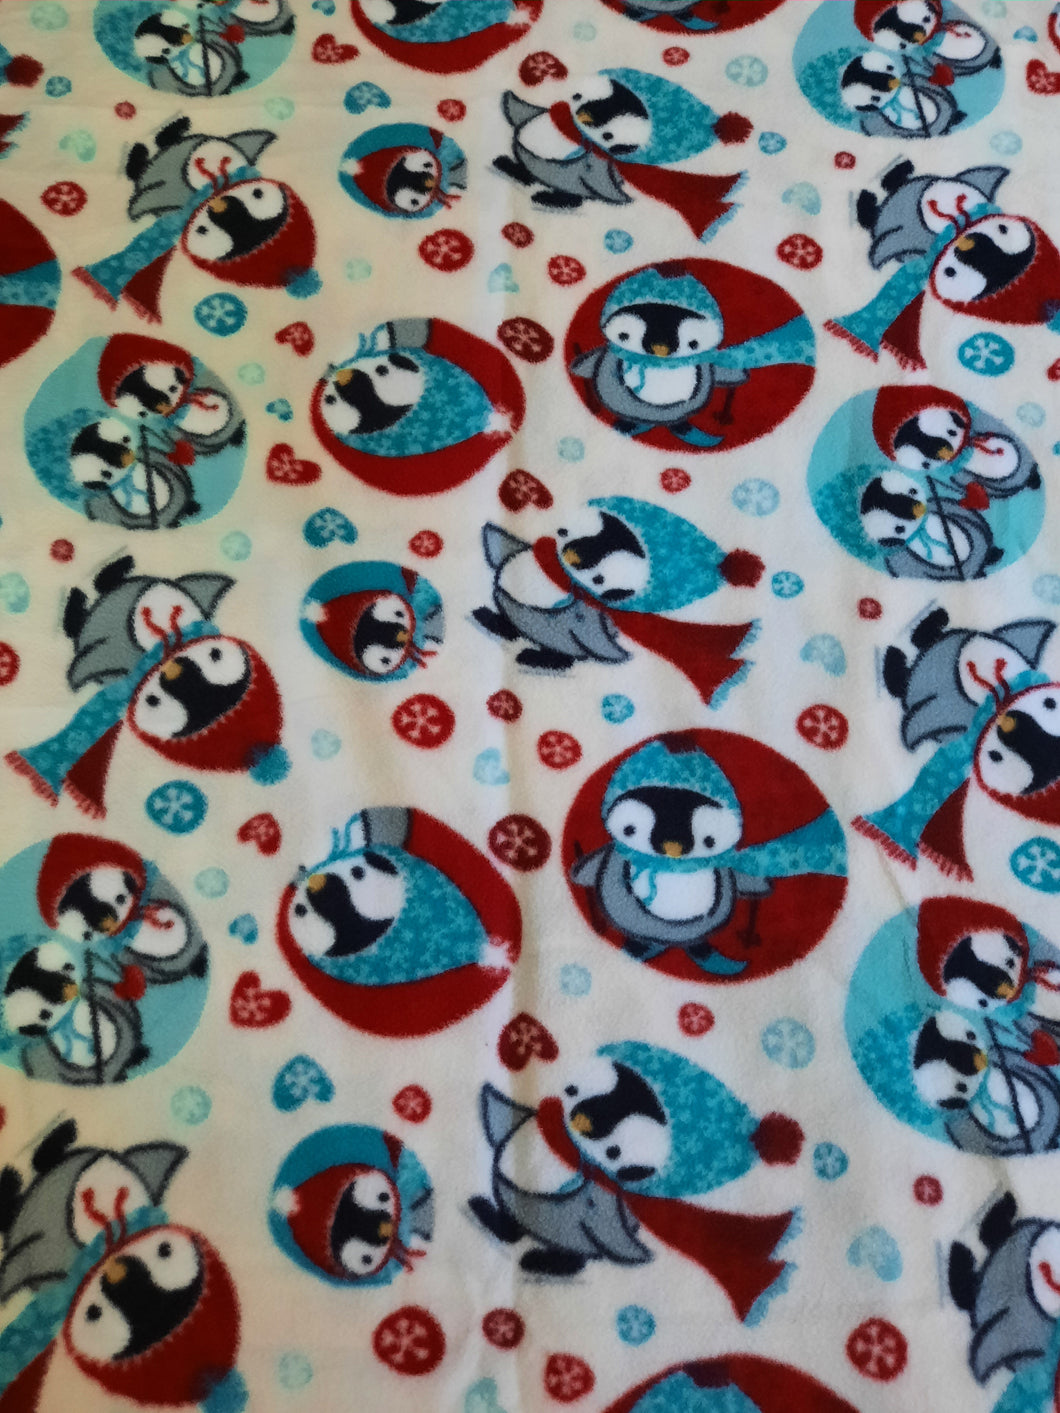 Throw Blanket - Penguins, in Bubbles, Red and Blue Fleece::Matching